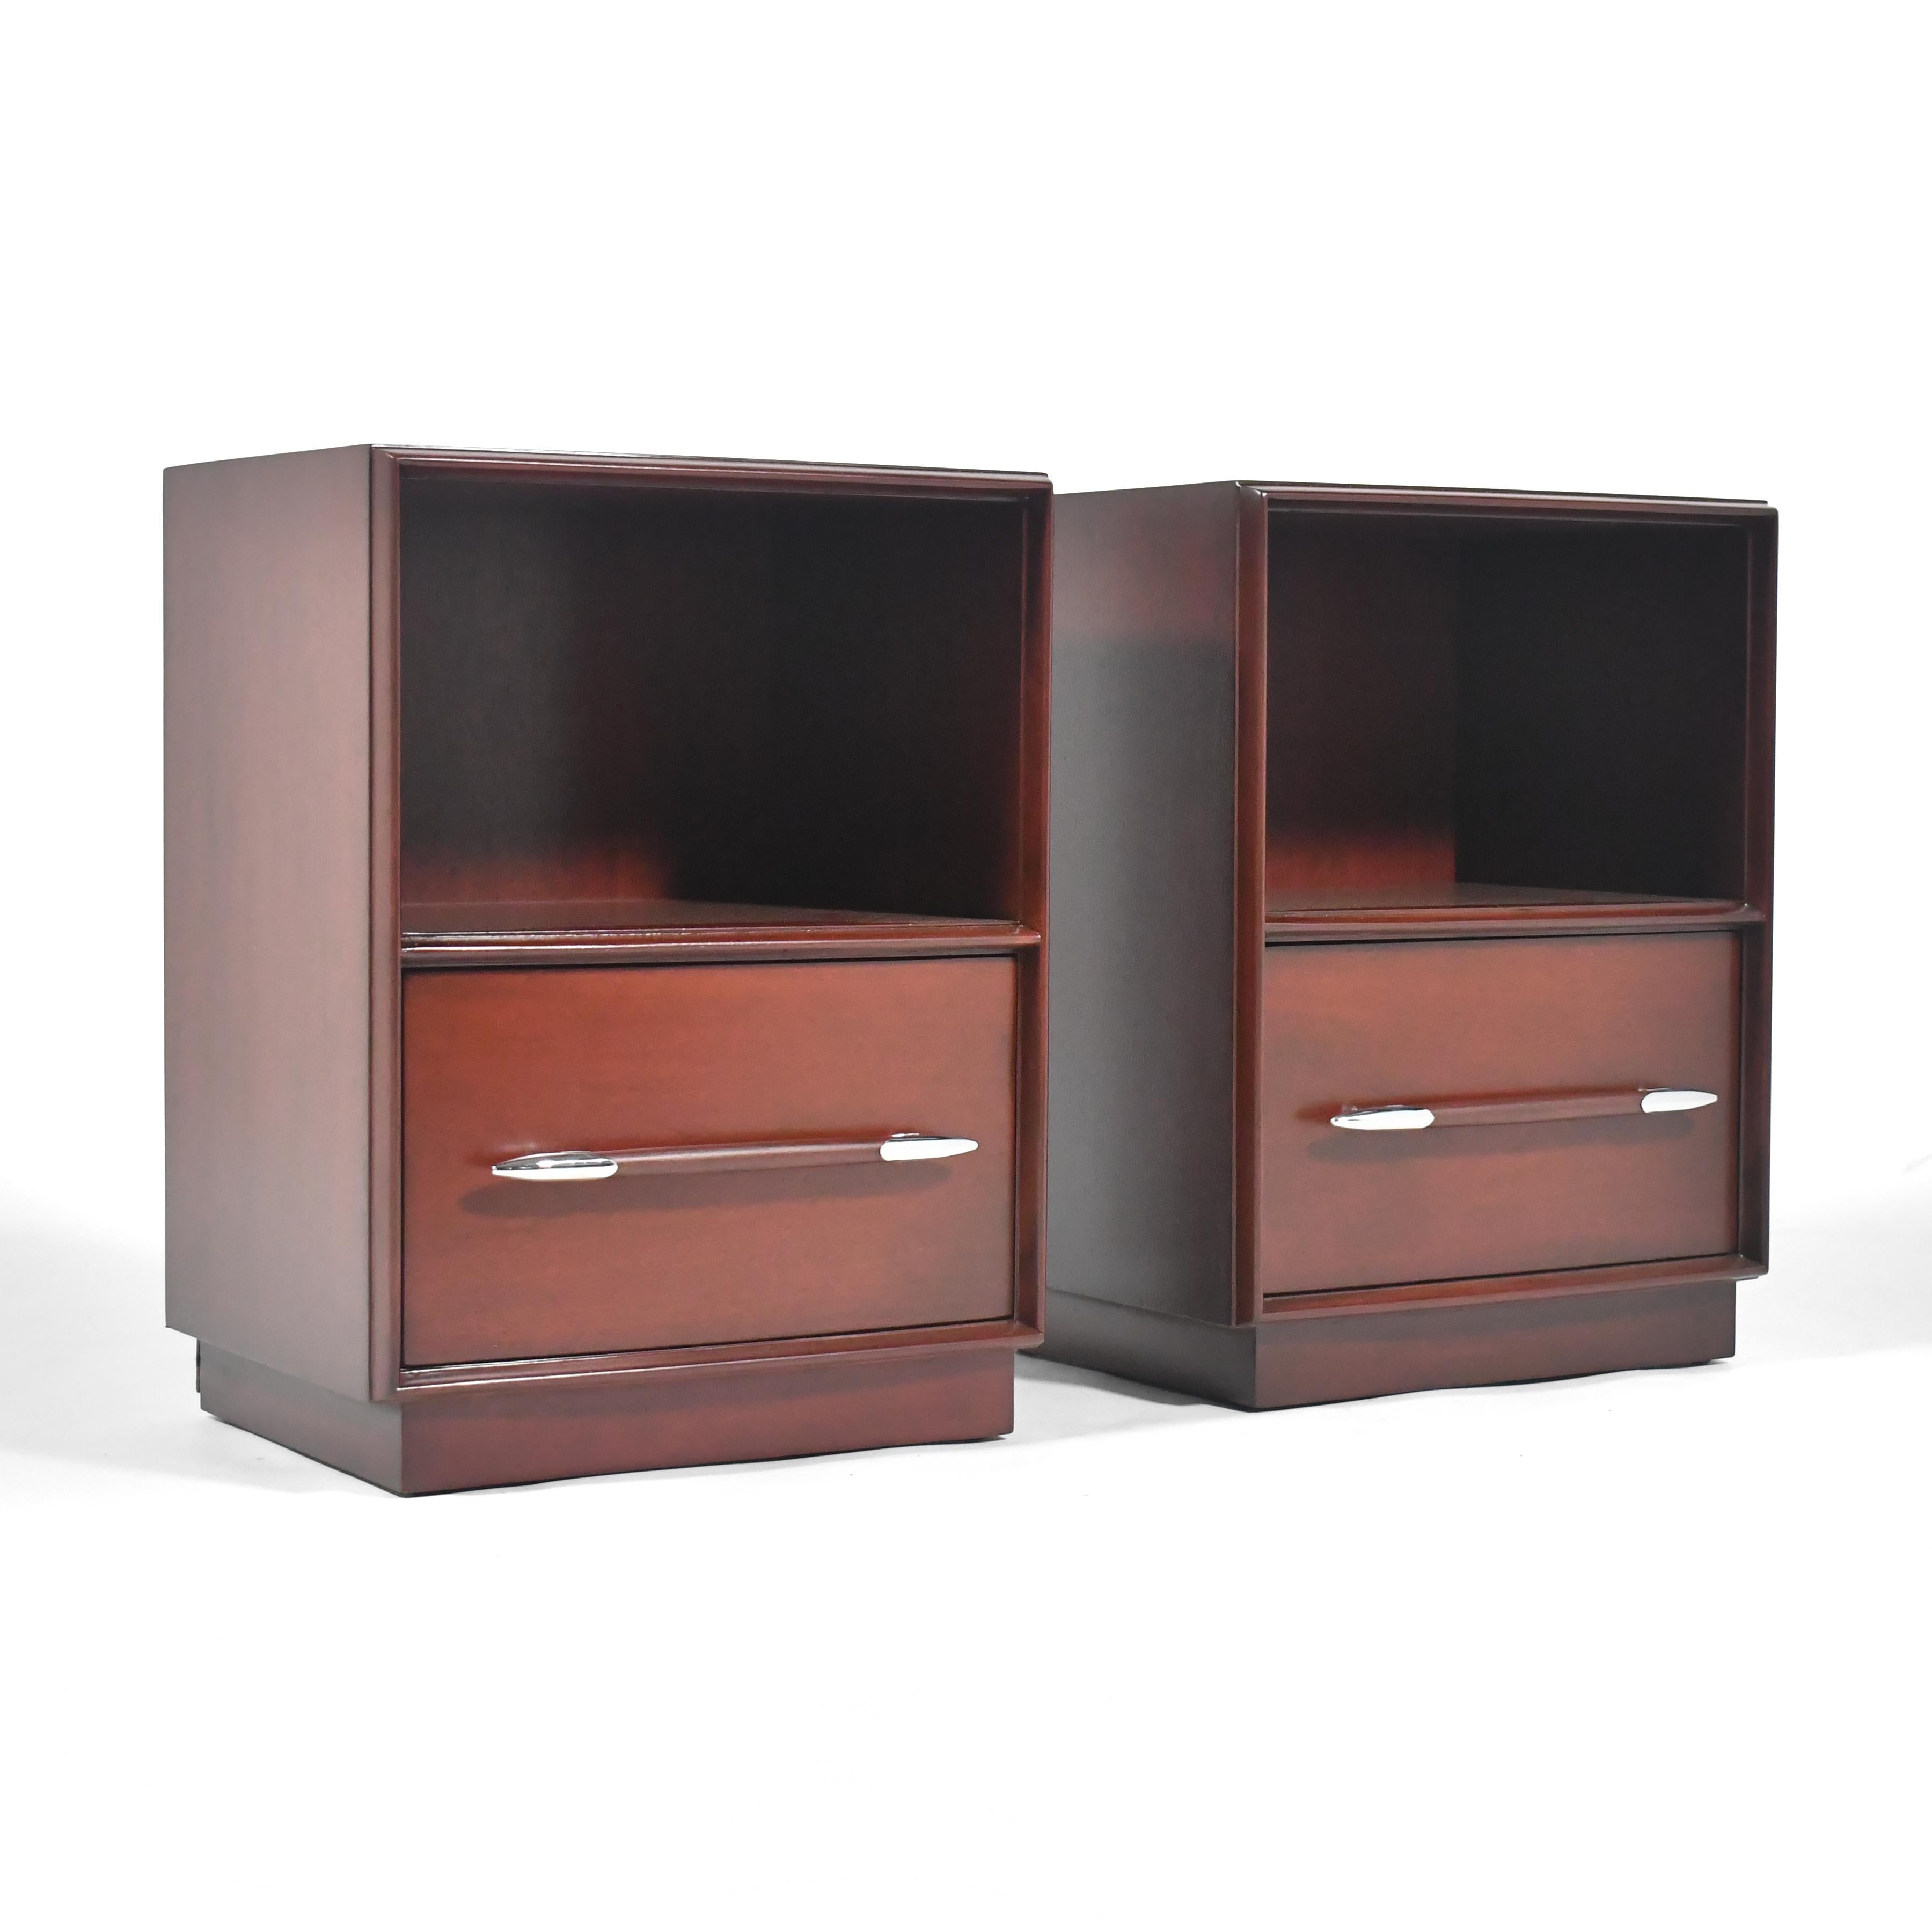 This pair of elegant Robsjohn-Gibbings nightstands by Widdocomb exhibit his signature style– refined, understated, with exceptional details such as the silver plated spear-shaped drawer pulls, they are as useful as they are handsome.

Newly